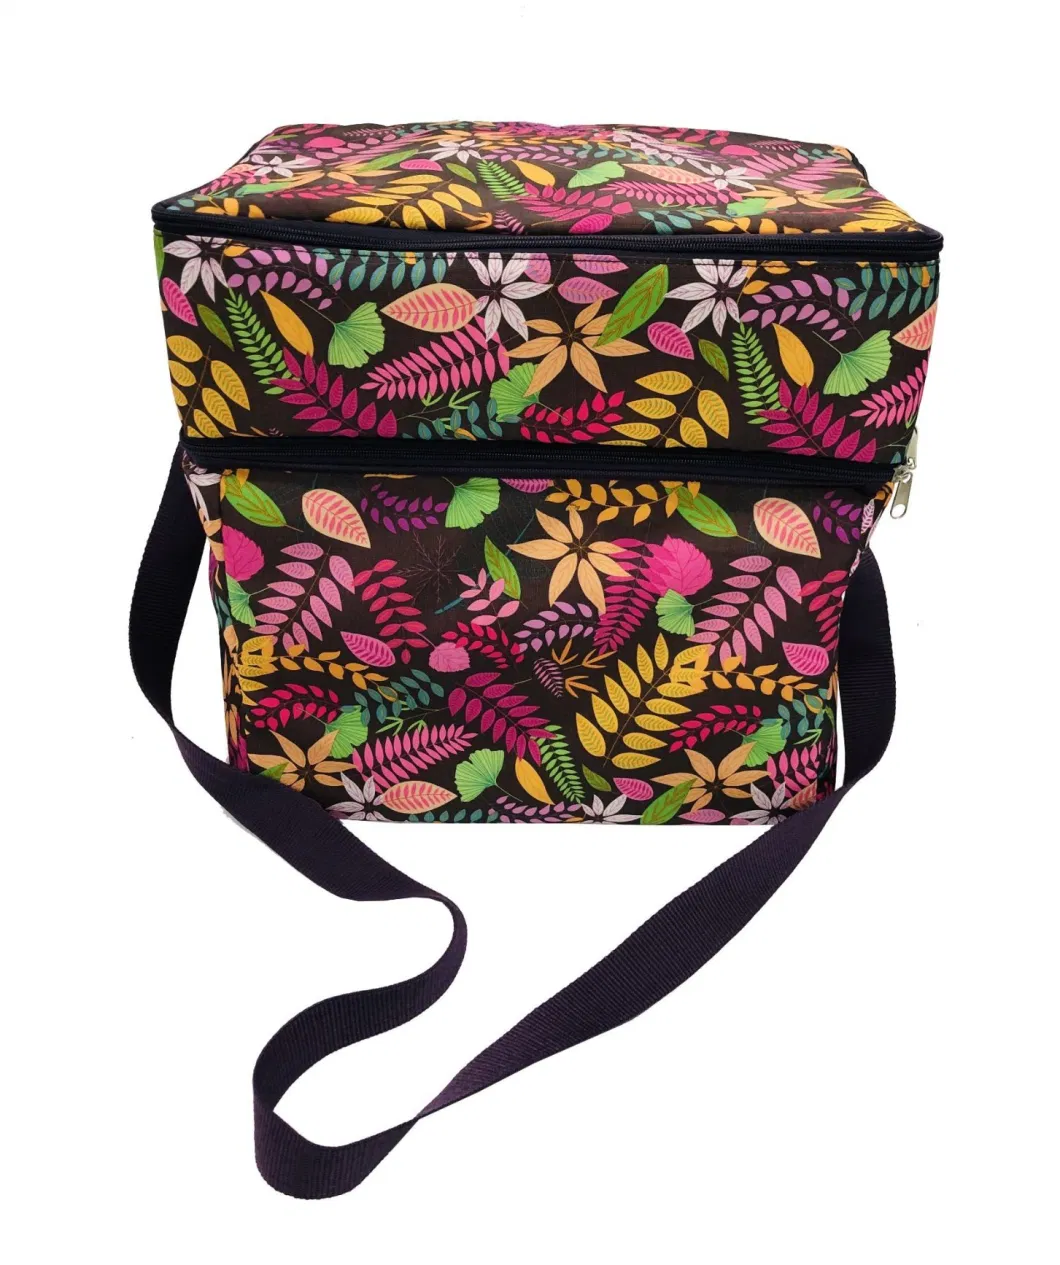 Cooler Bag Lunch Bag Box Insulated Travel Soft Sided Cooling Bag for Beach Picnic Camping BBQ